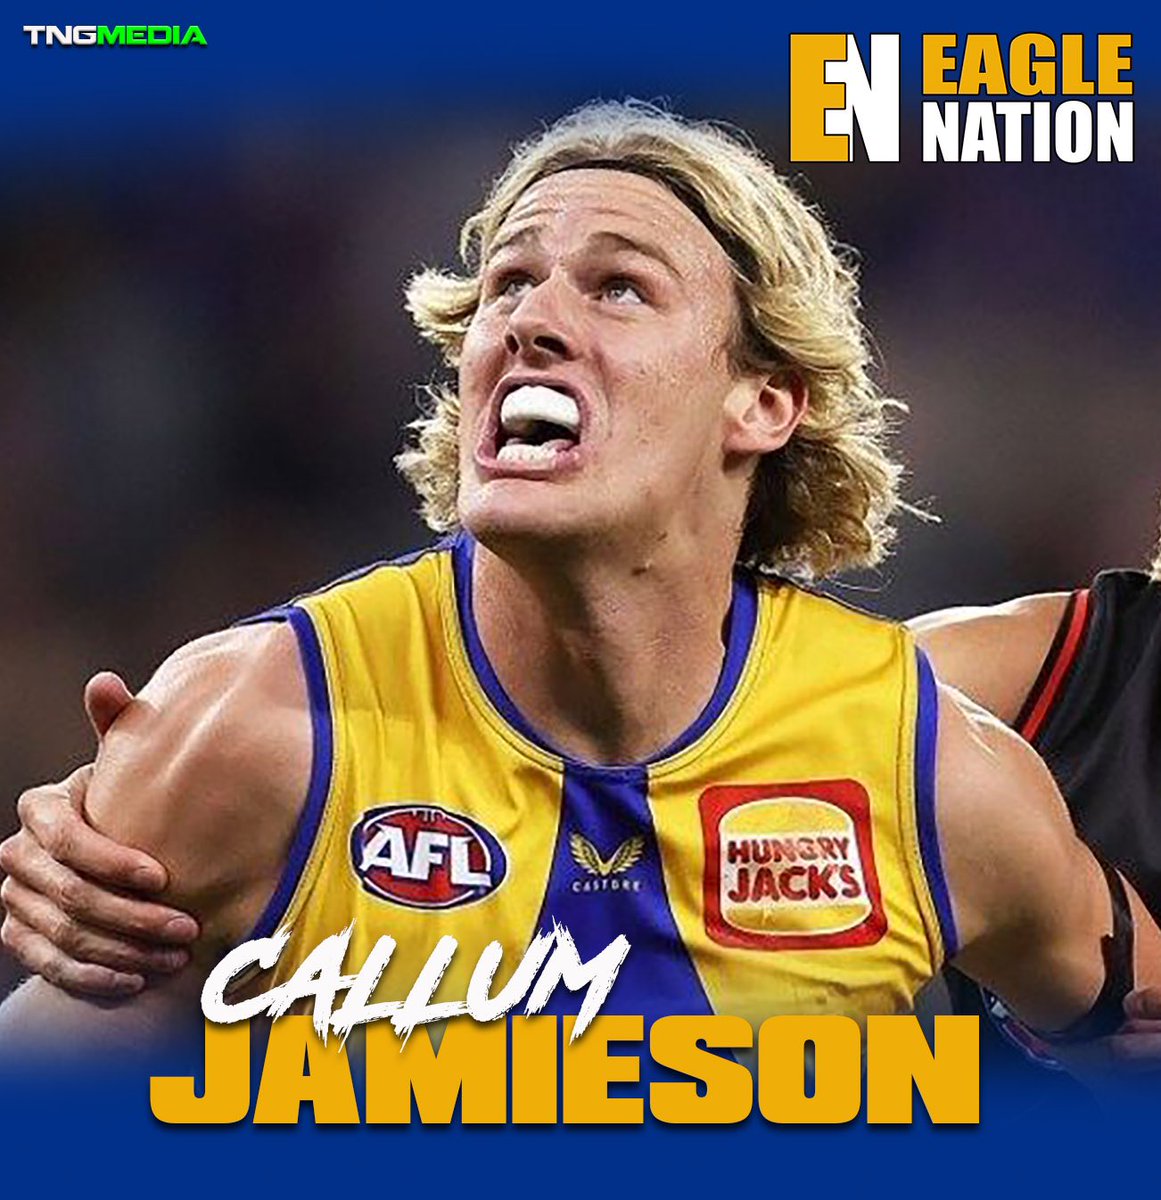 Can Callum that next step as Bailey has done?
If so is it in the Ruck or more up forward where he can add to the team balance?

#westcoasteagles #eaglenation #podcast